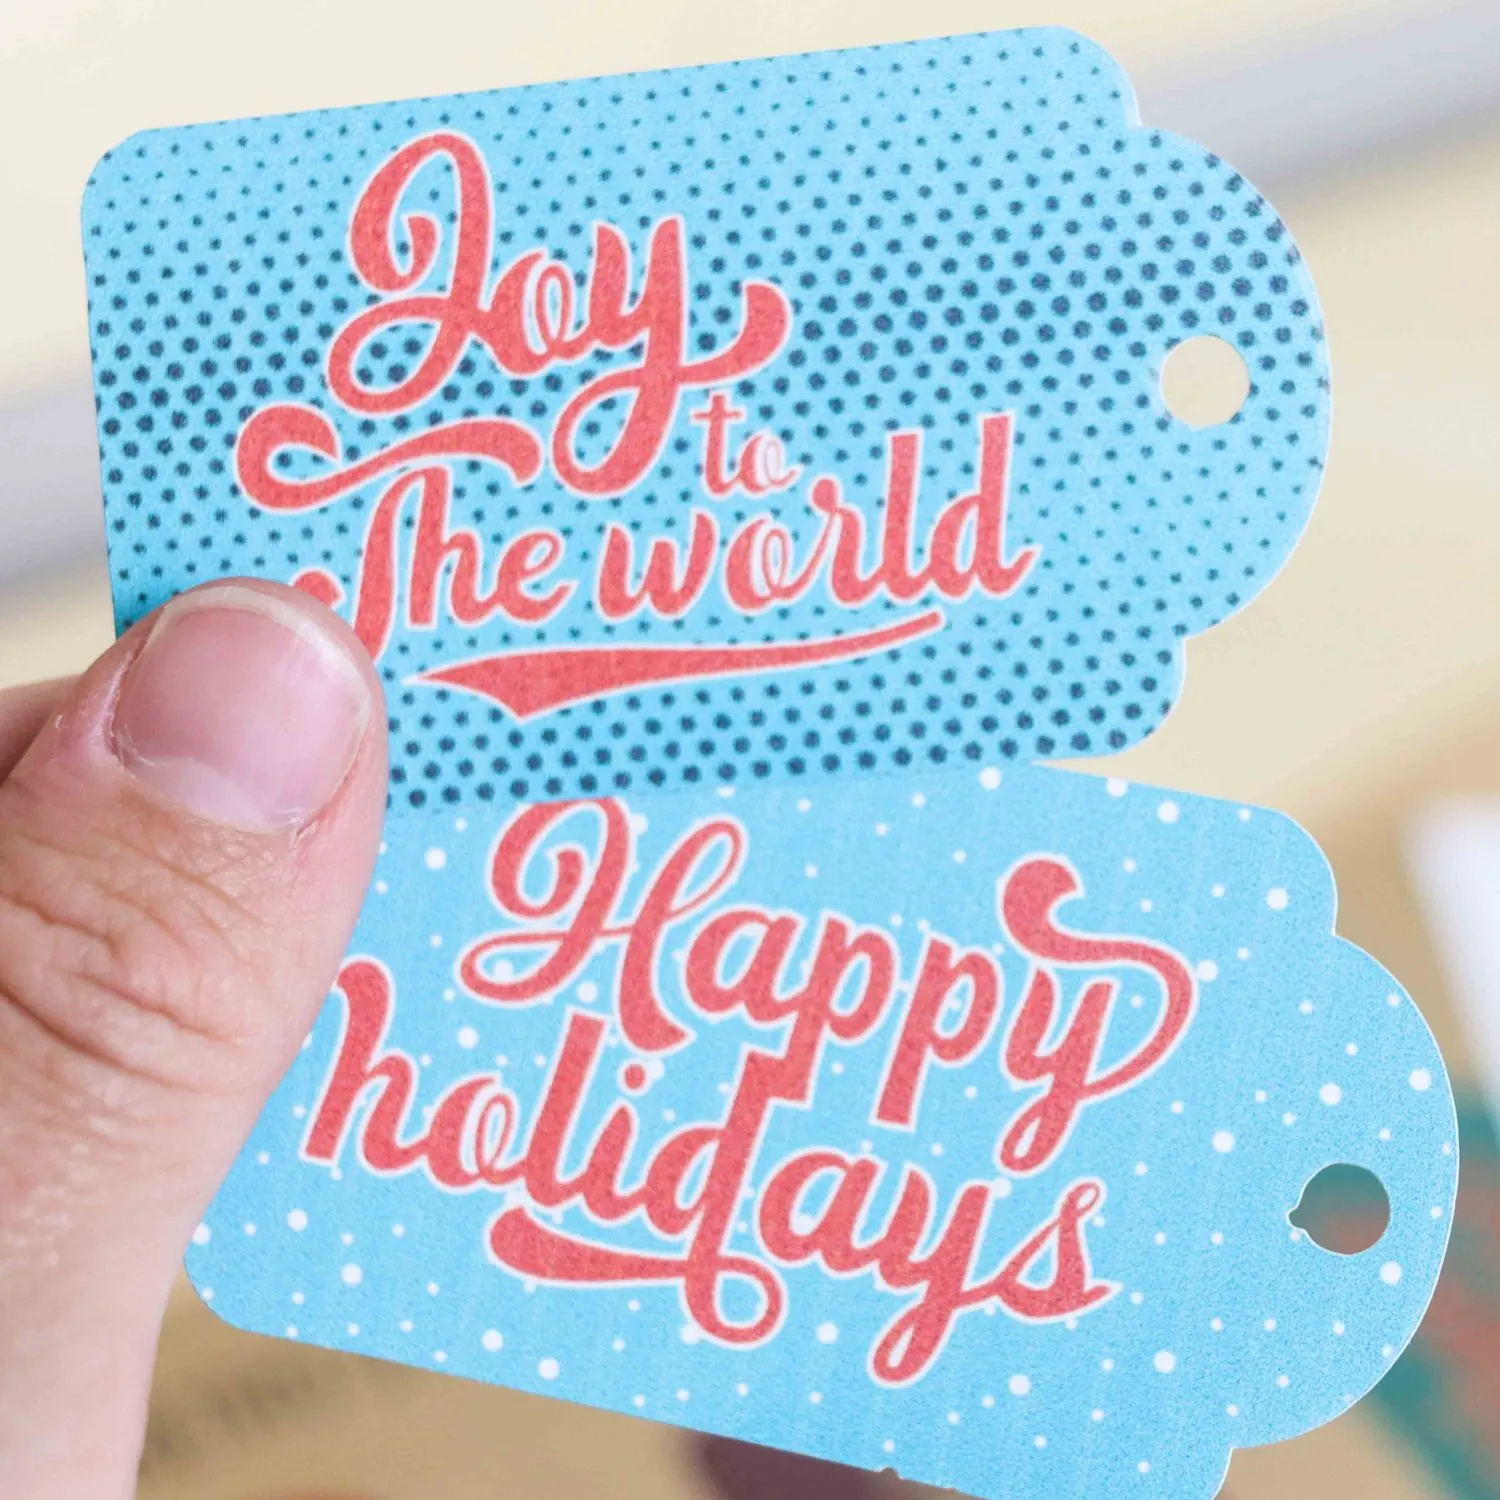 Retro style Christmas gift tags (Blue and Red)